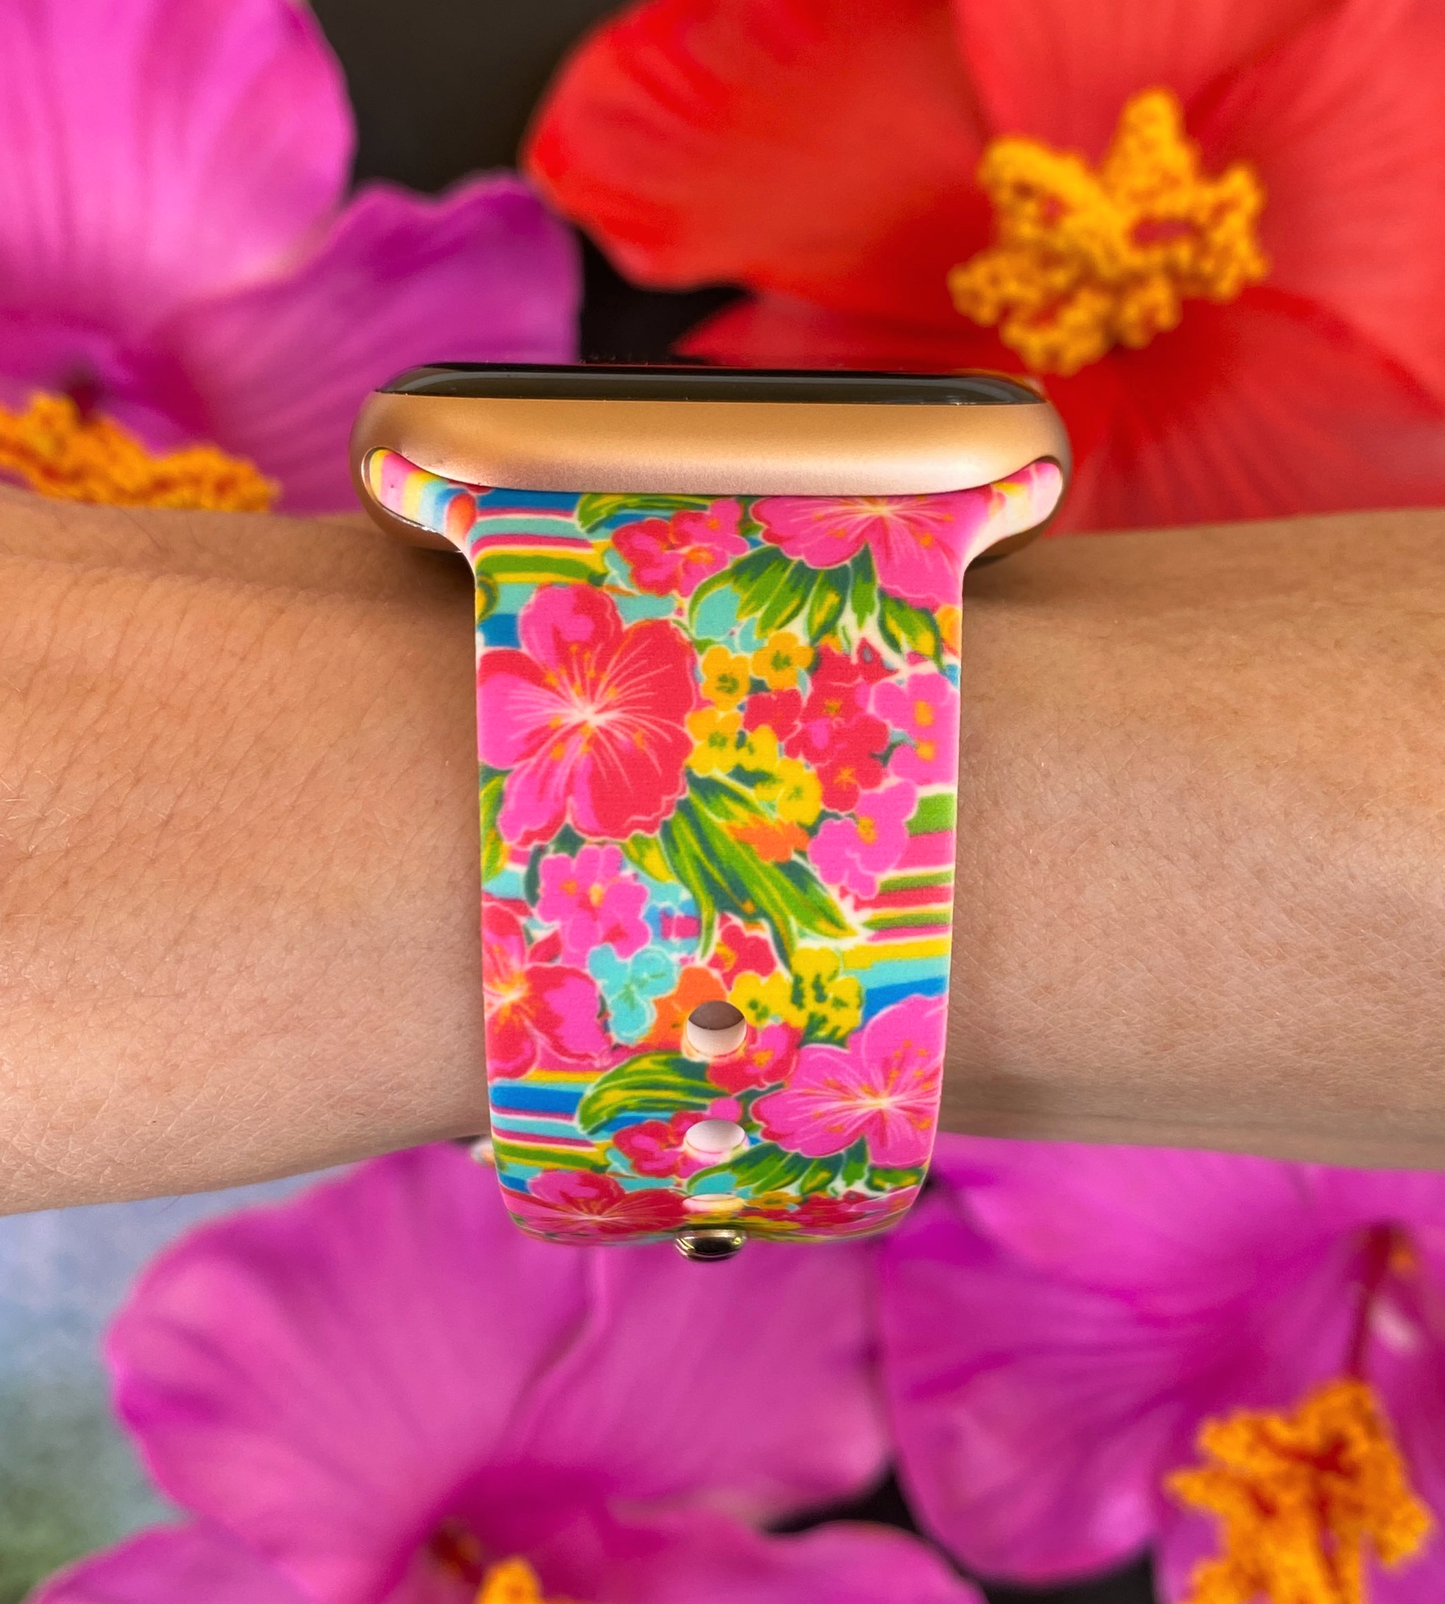 Colorful Hibiscus Apple Watch Band